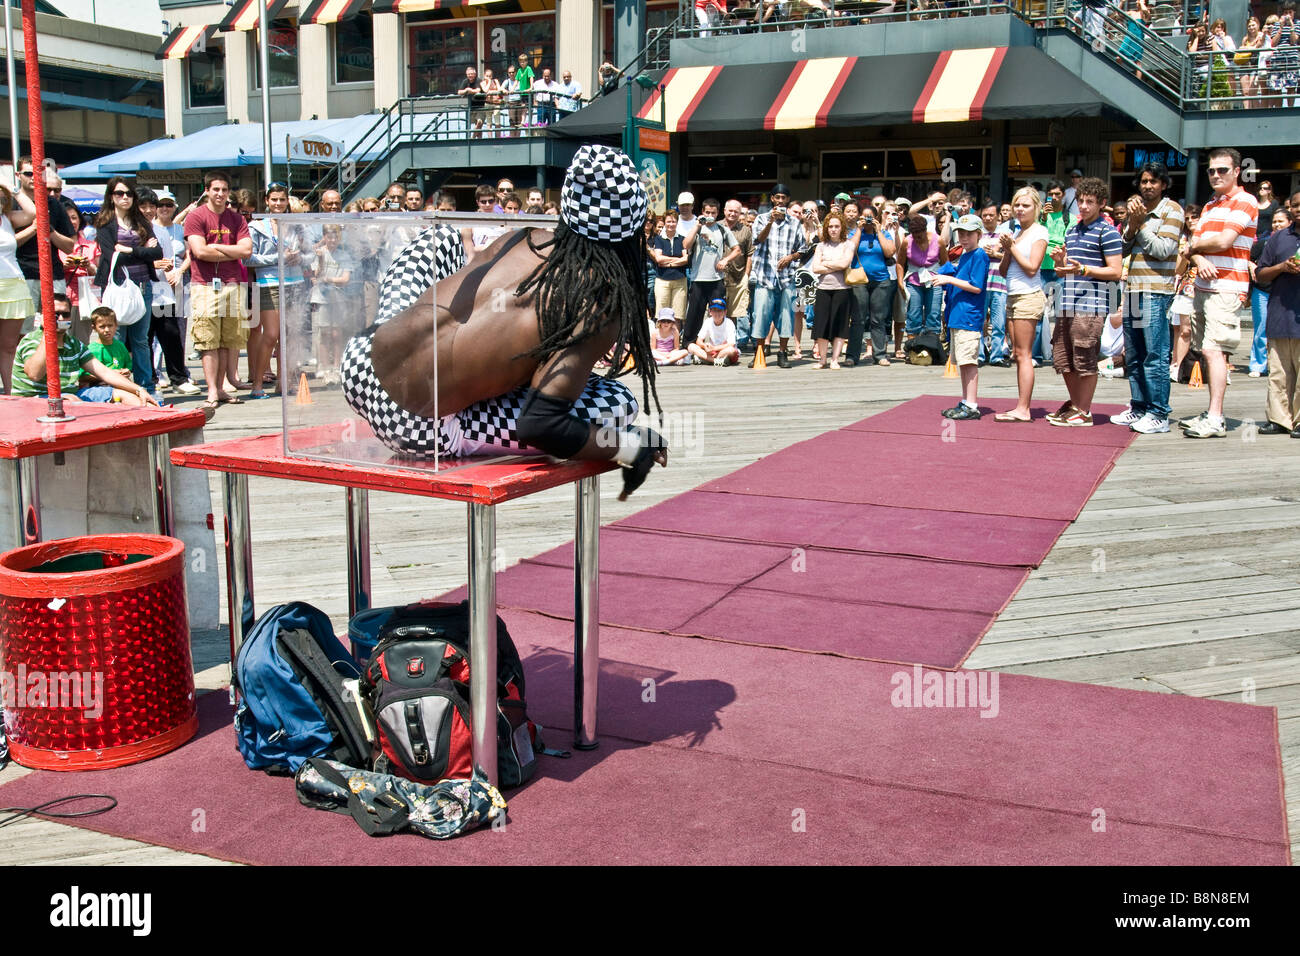 Street performer climbing into a transparent glass box during a contortionist act Stock Photo